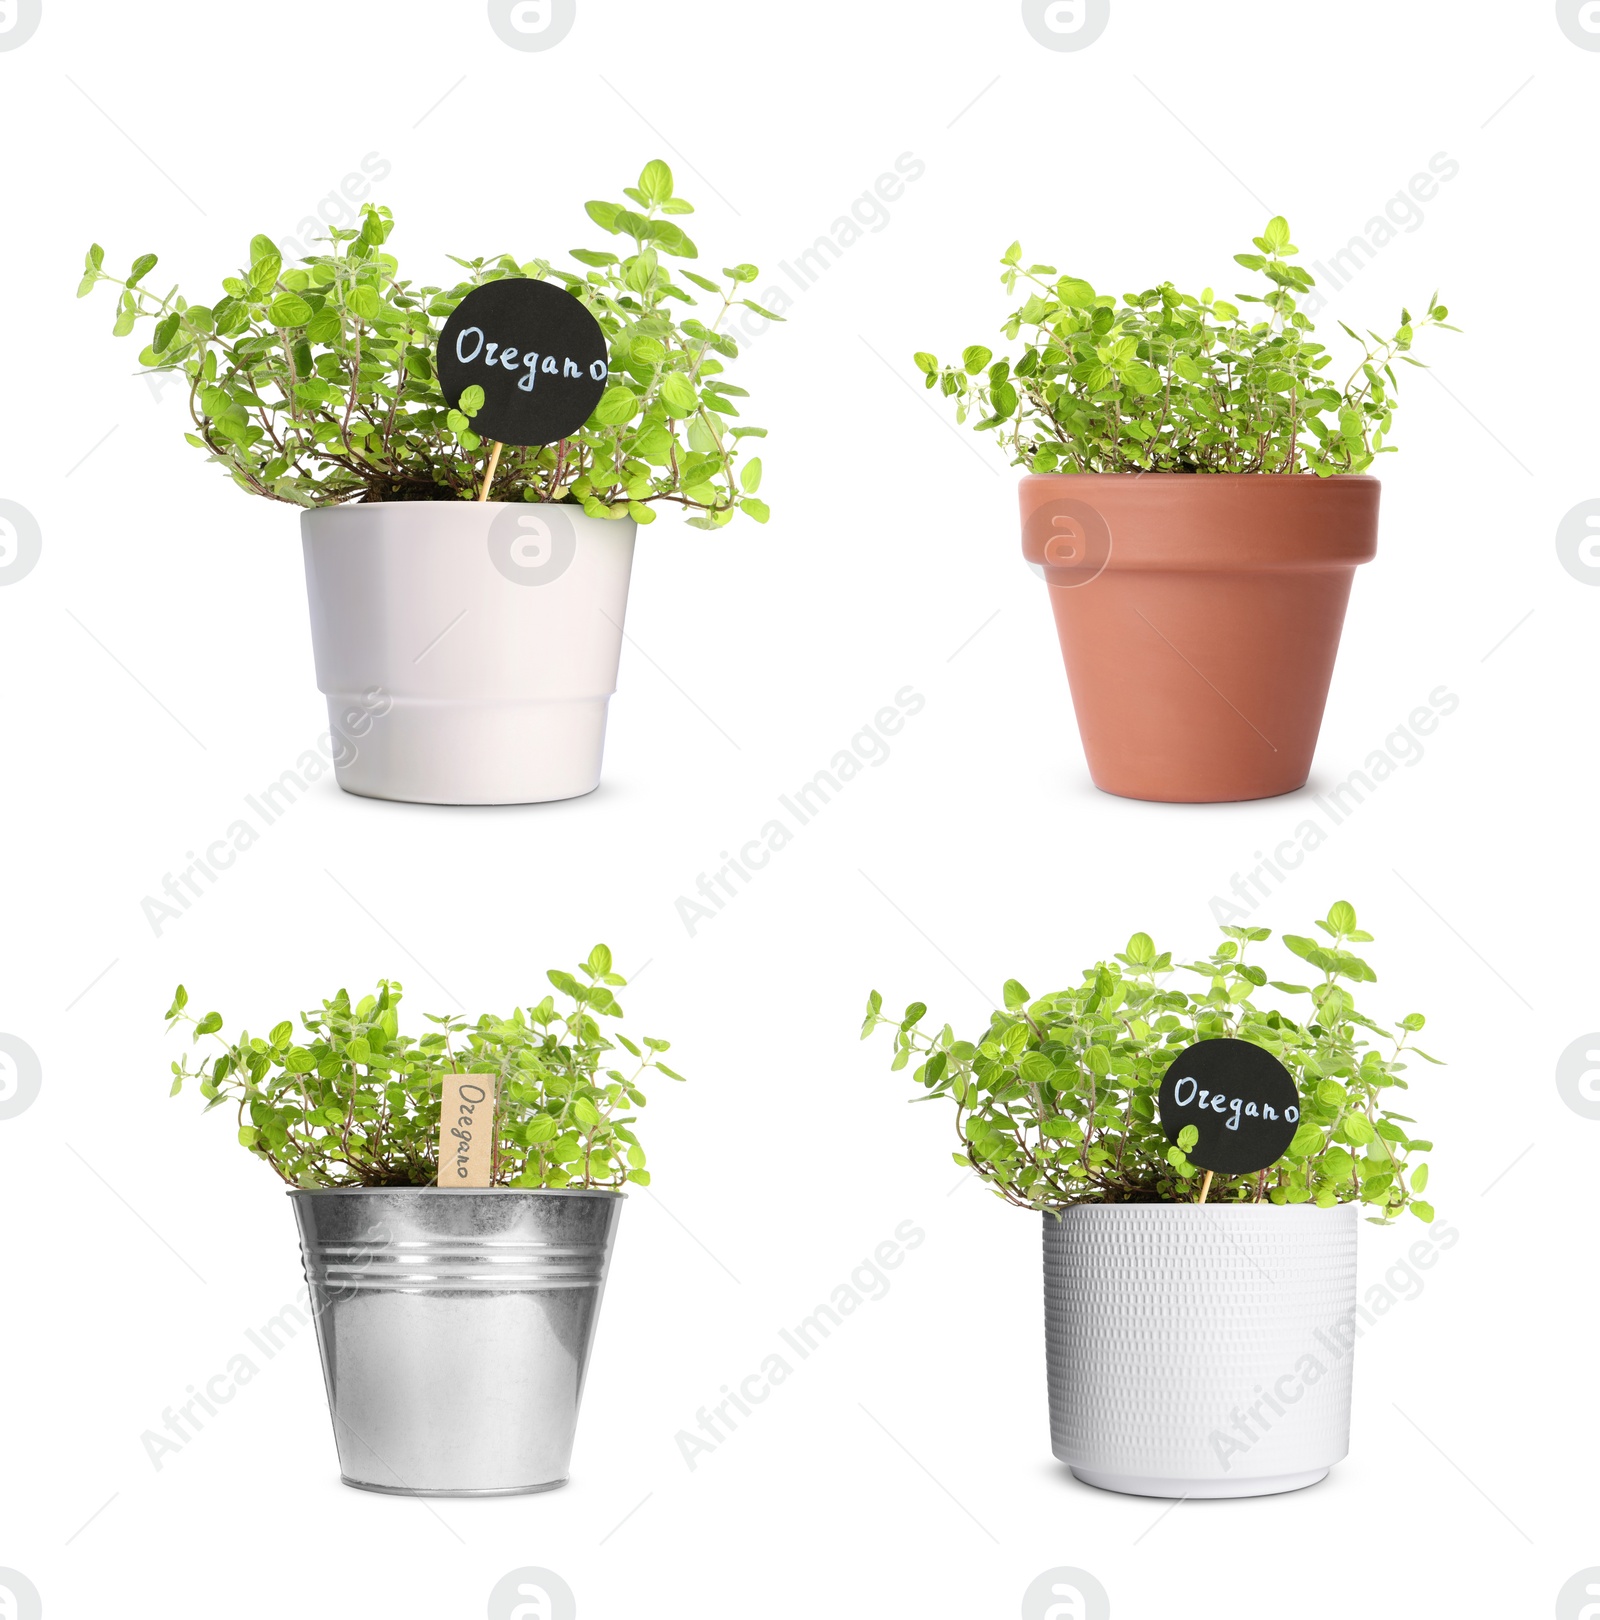 Image of Collage with oregano growing in different pots isolated on white